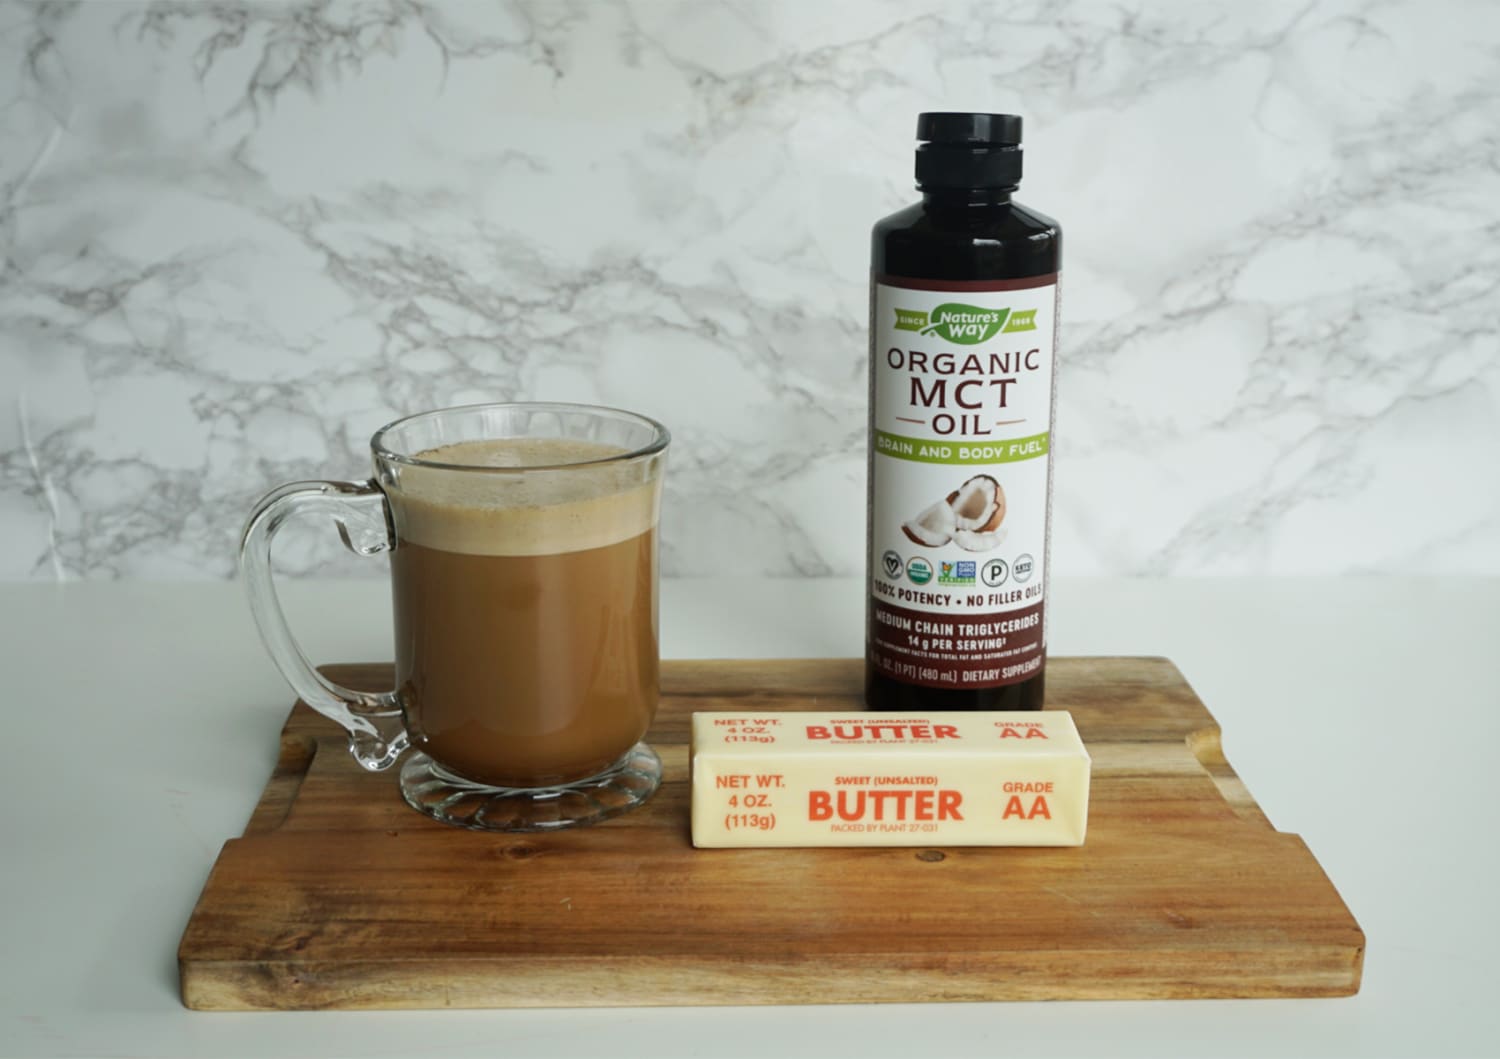 Bulletproof coffee: is adding butter to your brew a step too far?, Coffee